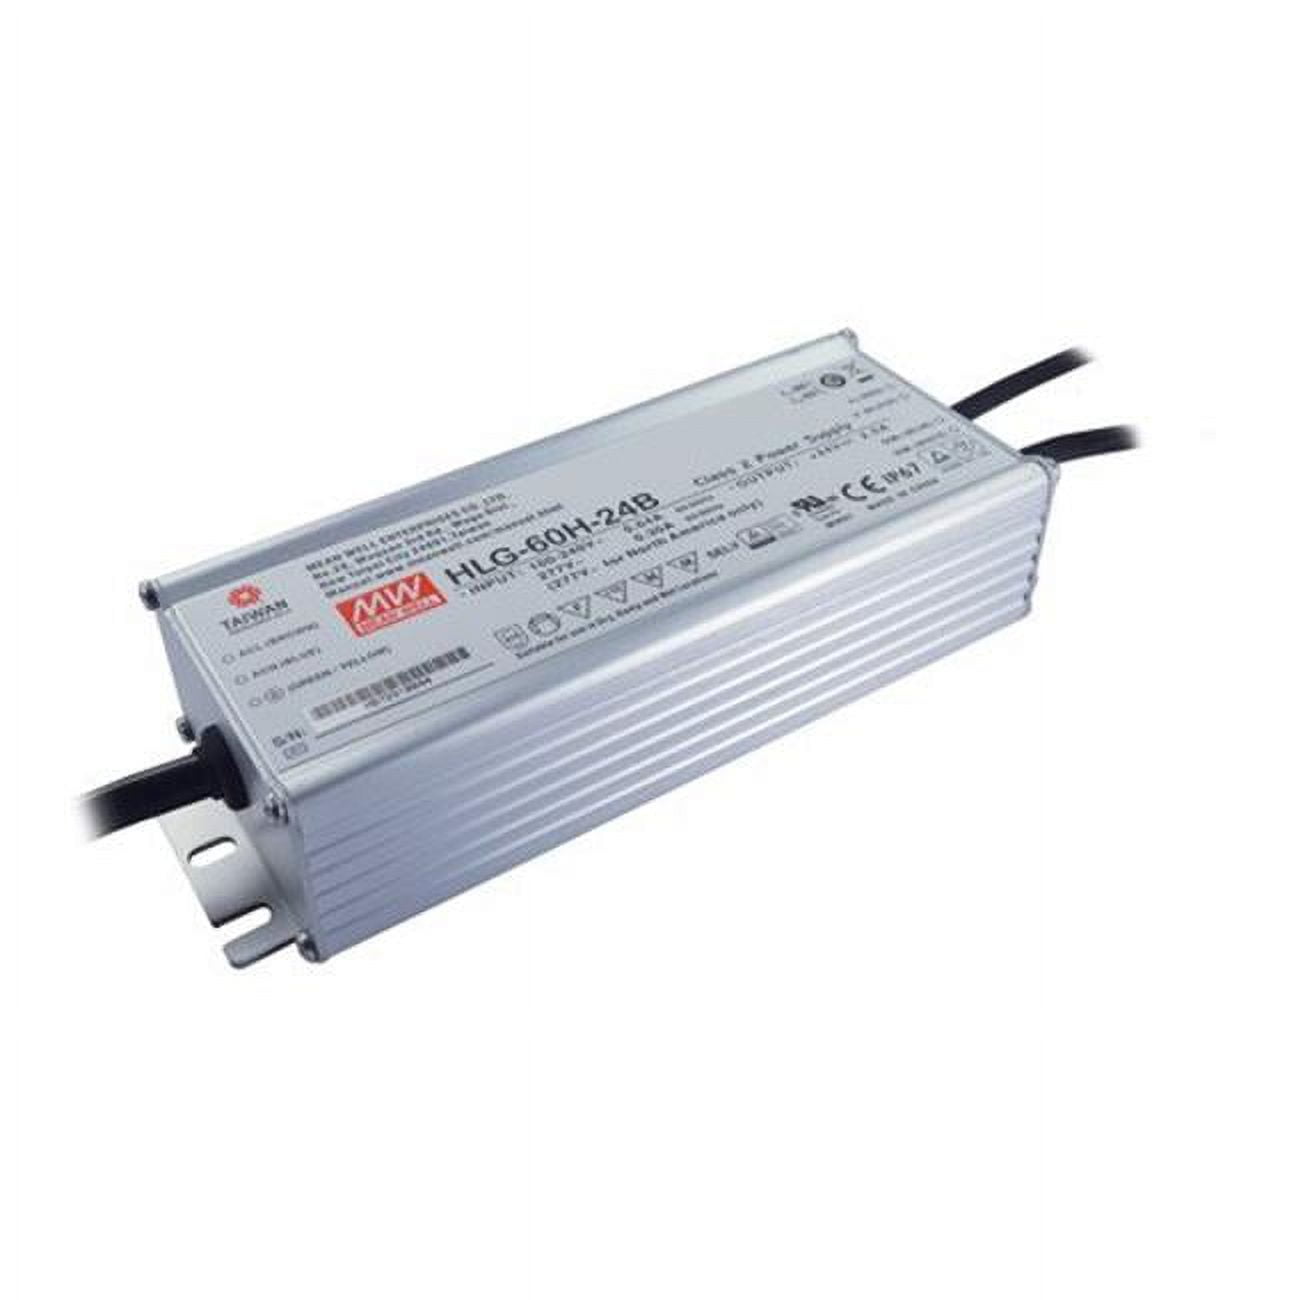 Ccv-dr60-24 60w 24v Dimmable Driver